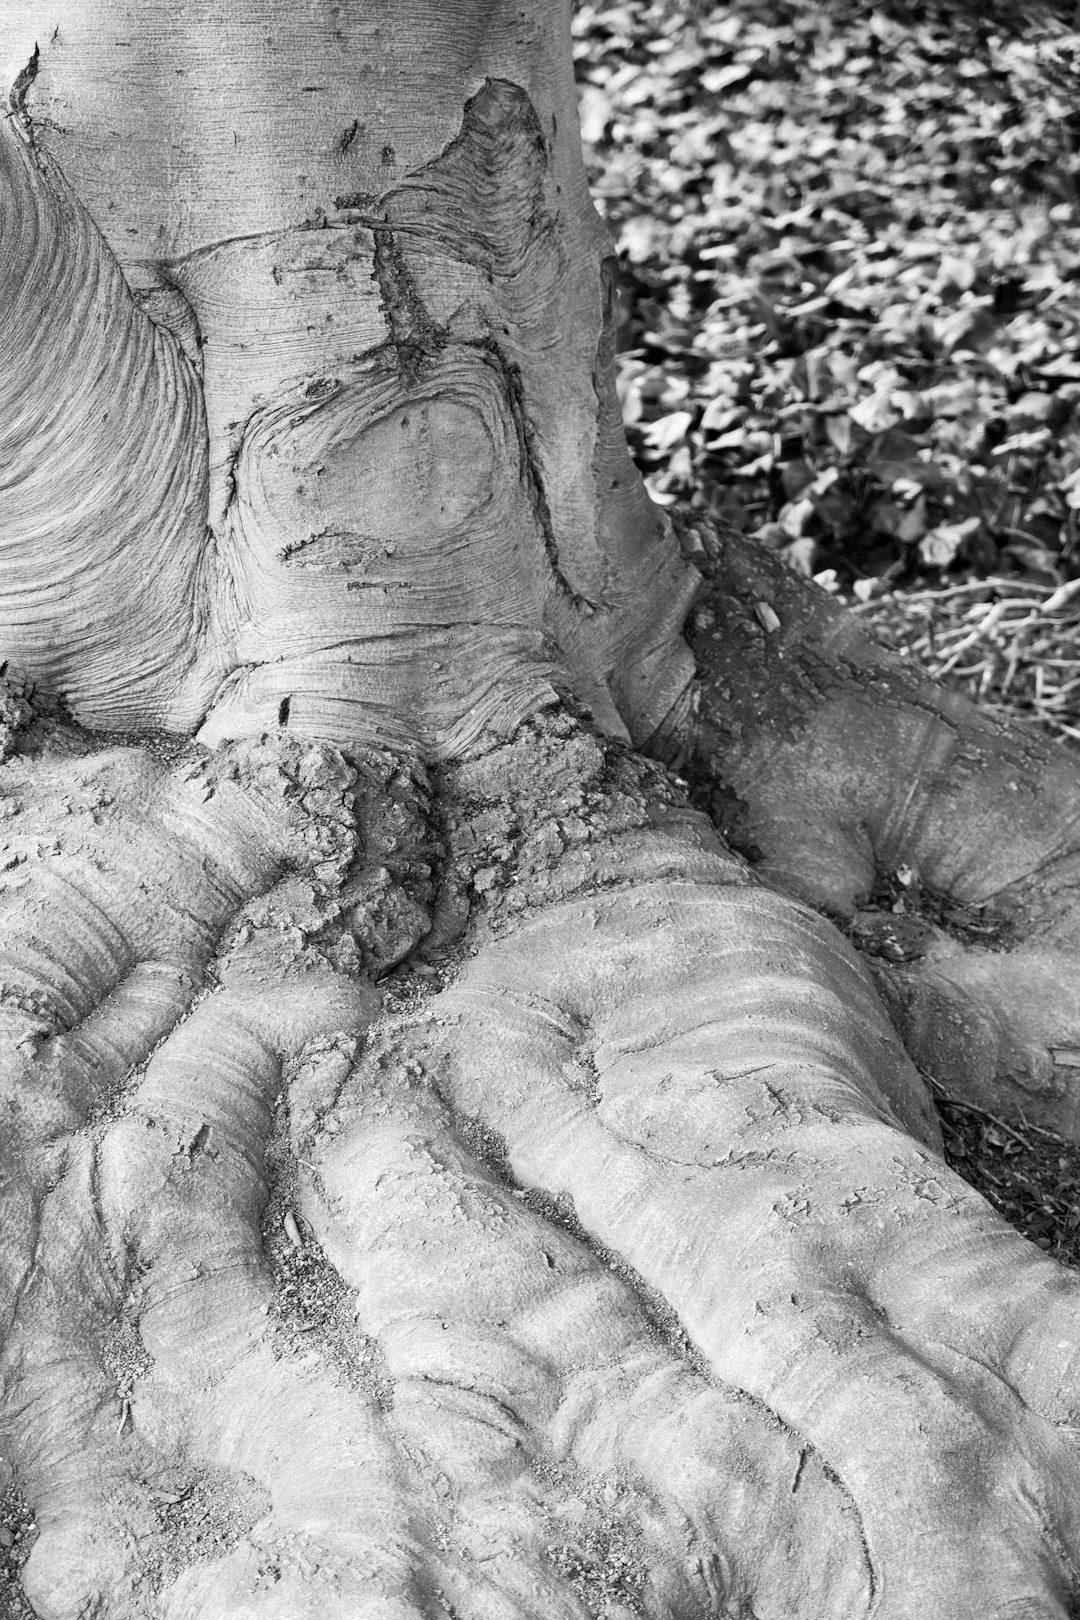 ice plant jade, root rot, grayscale photo of persons feet